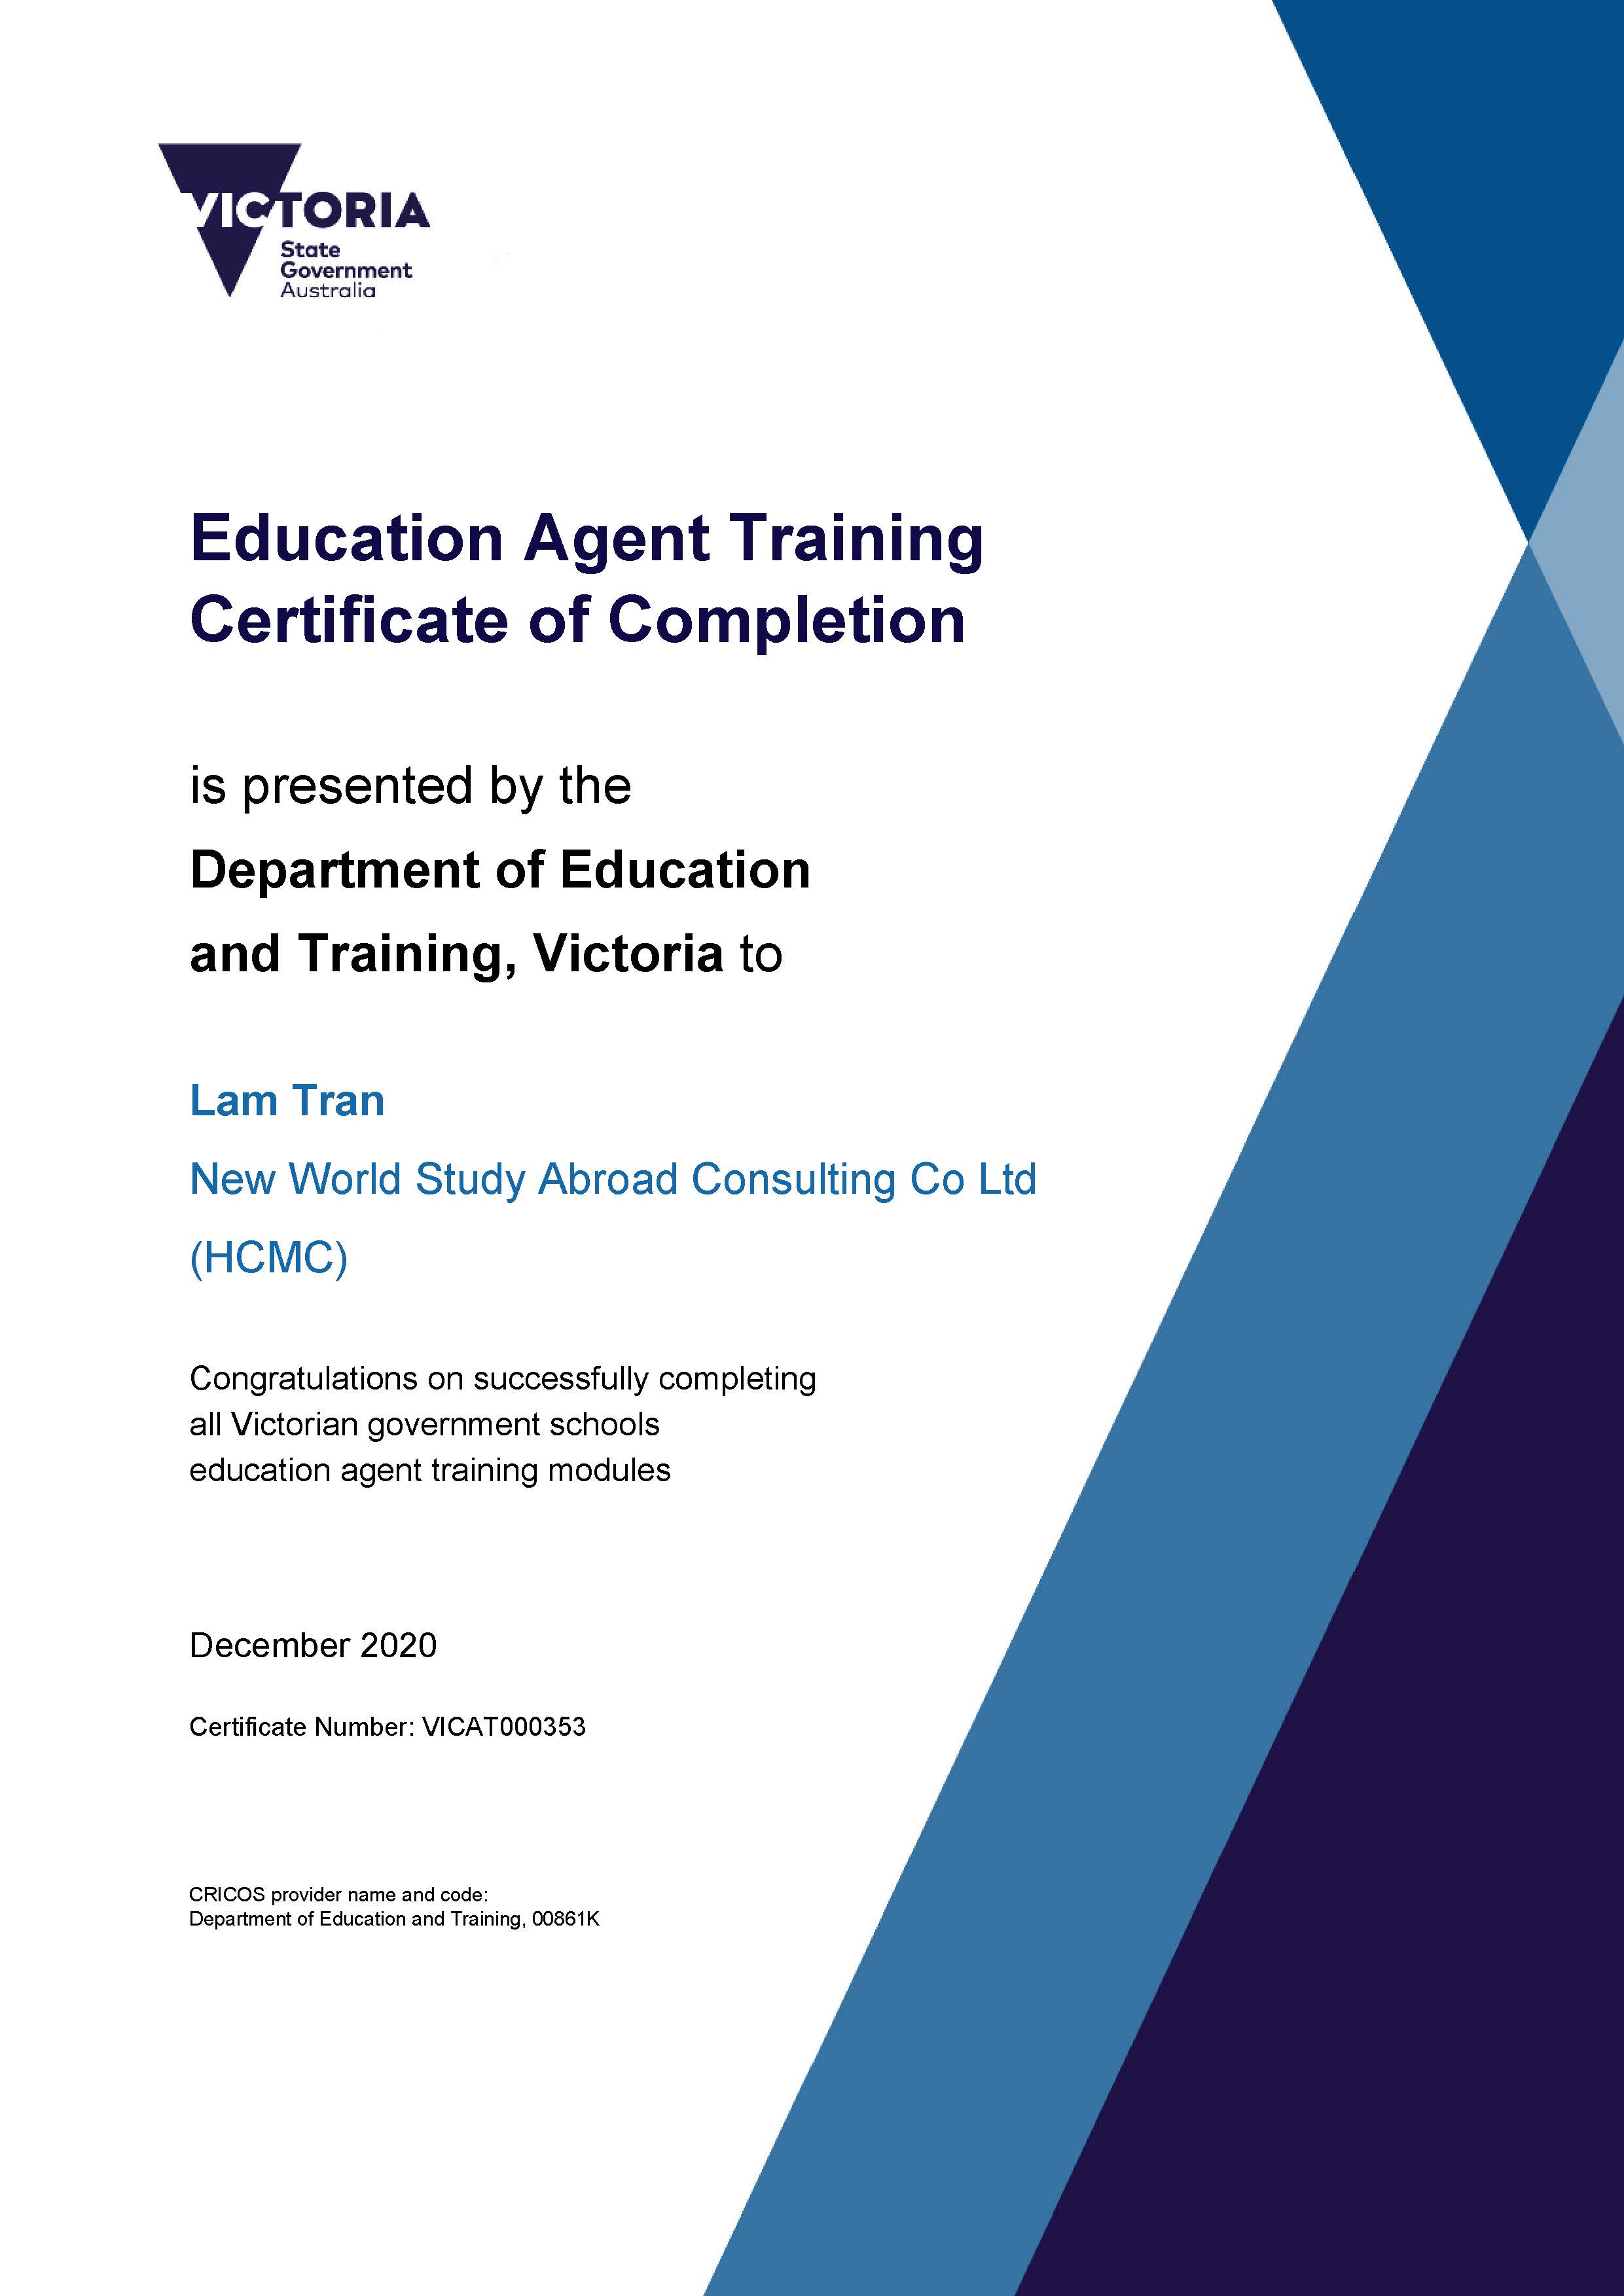 Certificate from Department of Education and Training, Victoria